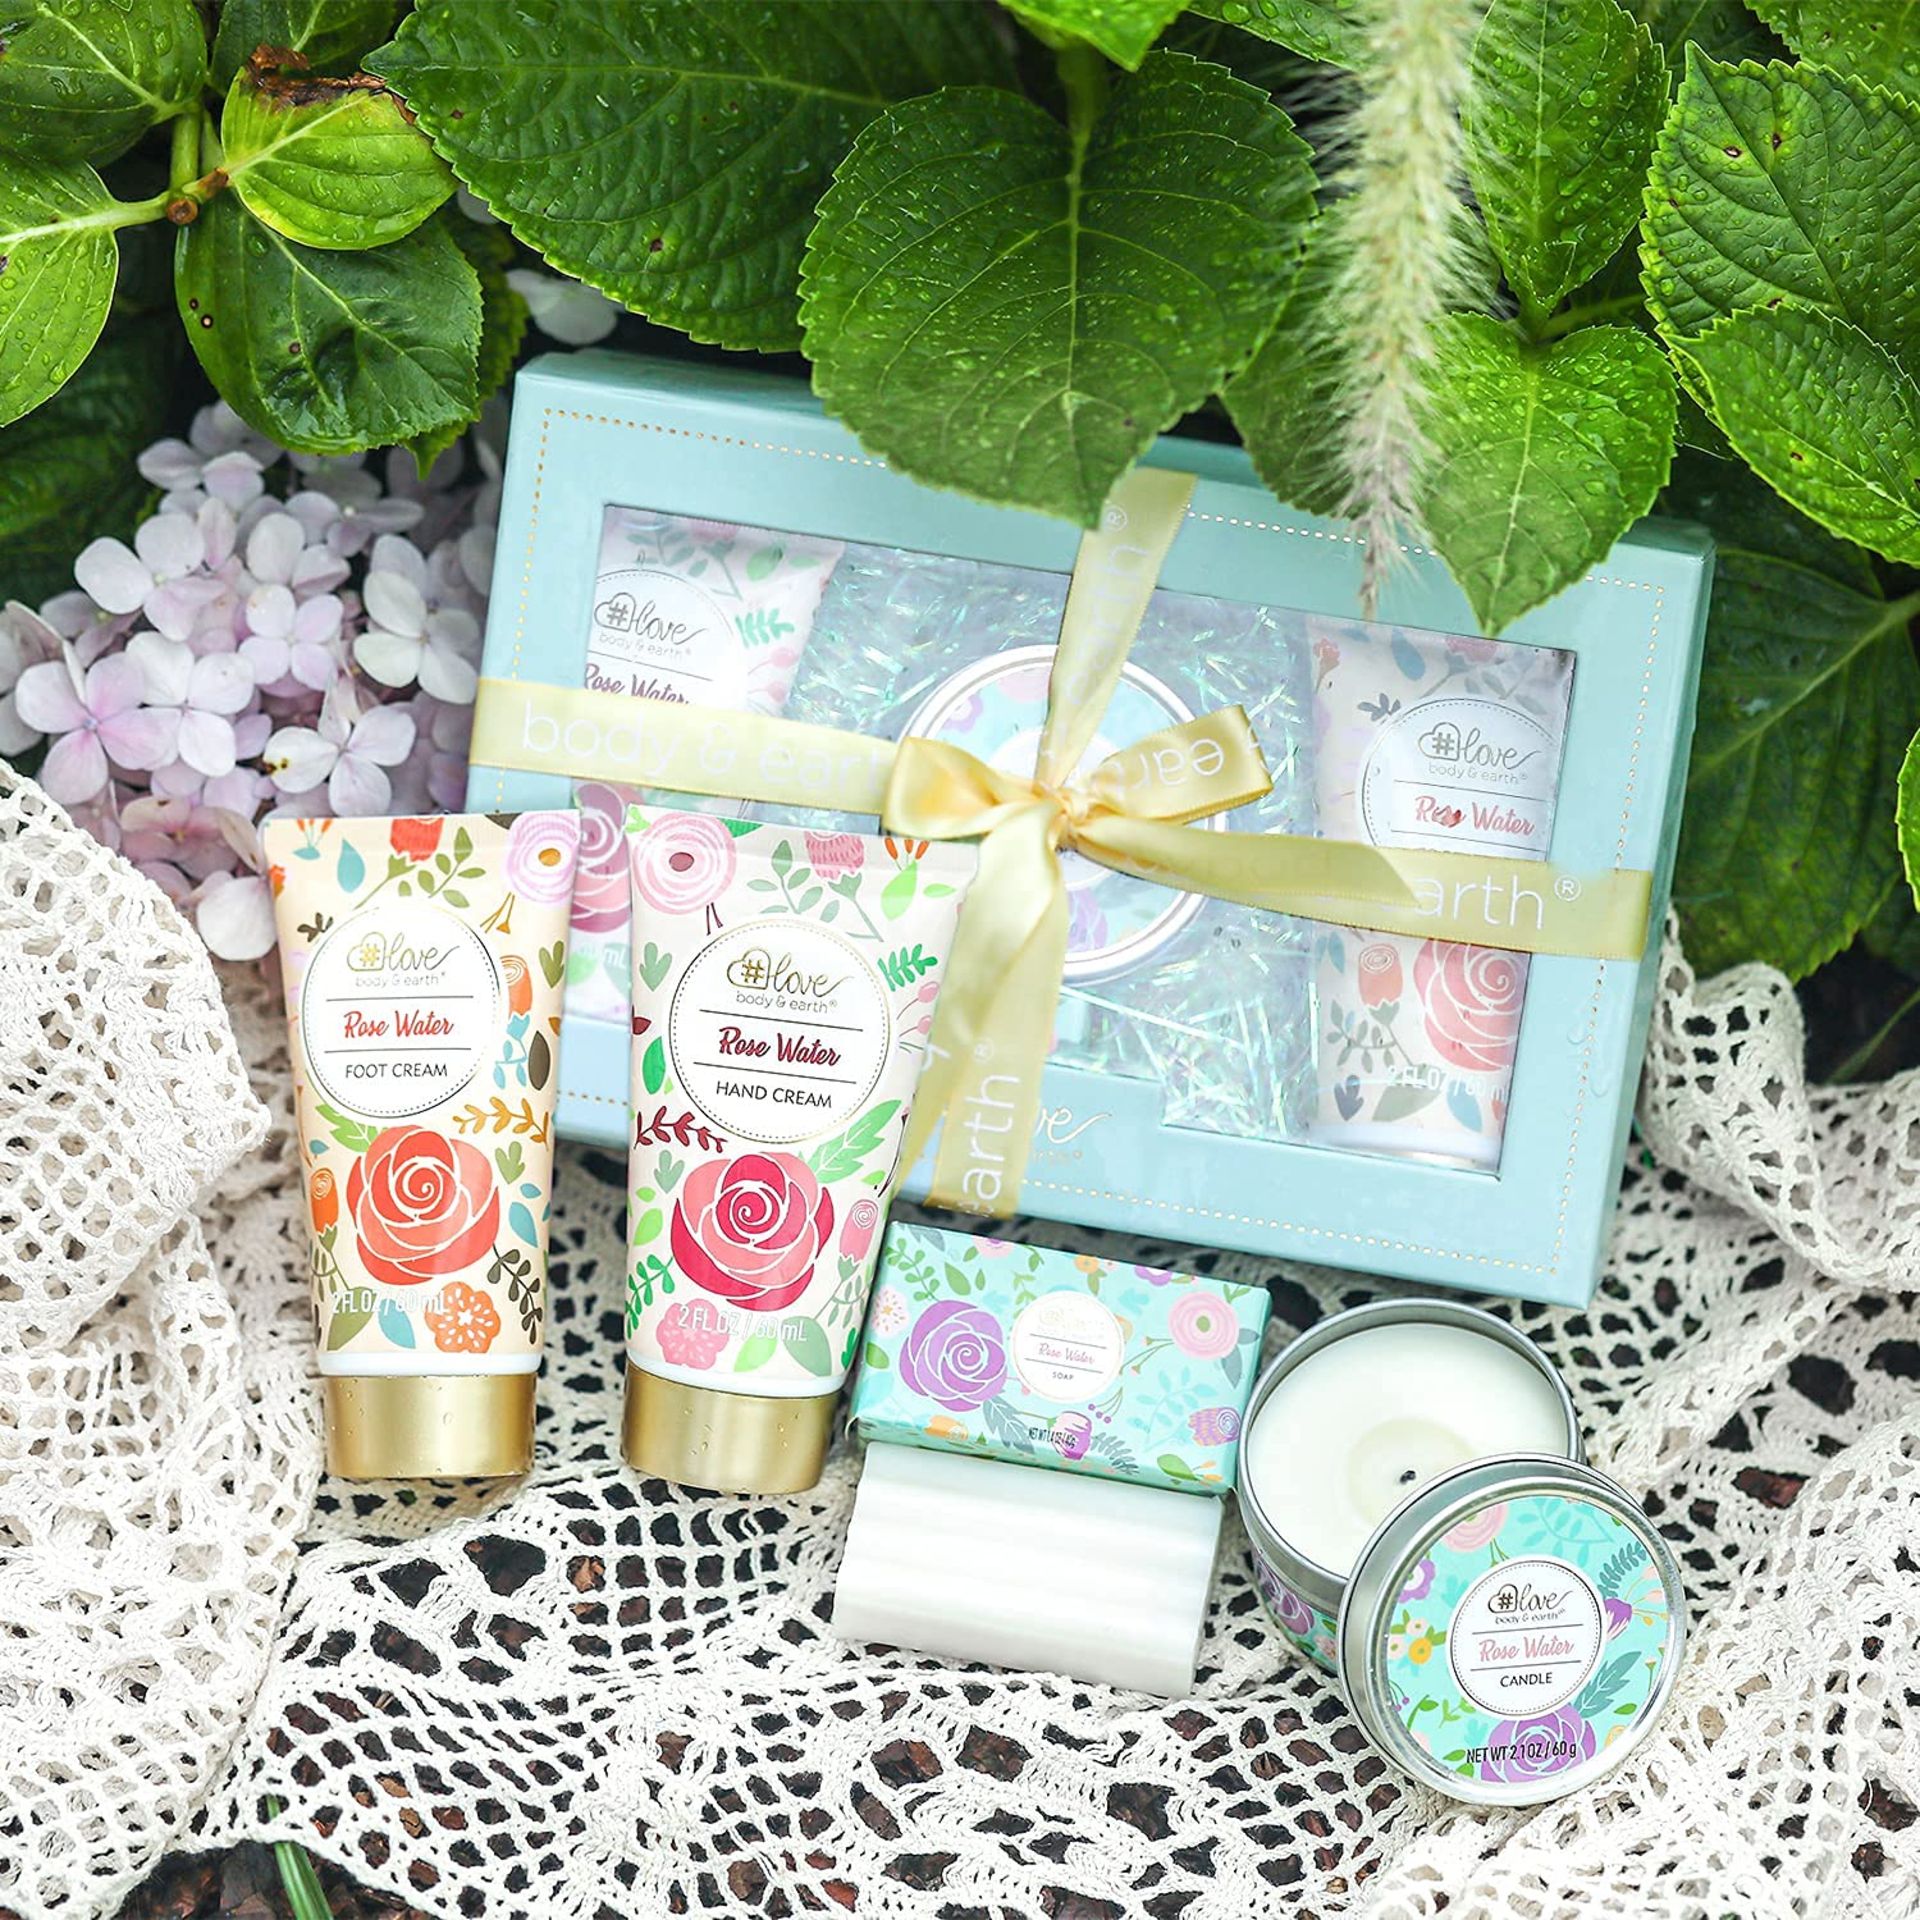 Lotion Gift Set, Gift Set for Women, Include Hand Cream, Foot Cream, Soap, Scented Candle - Image 2 of 6